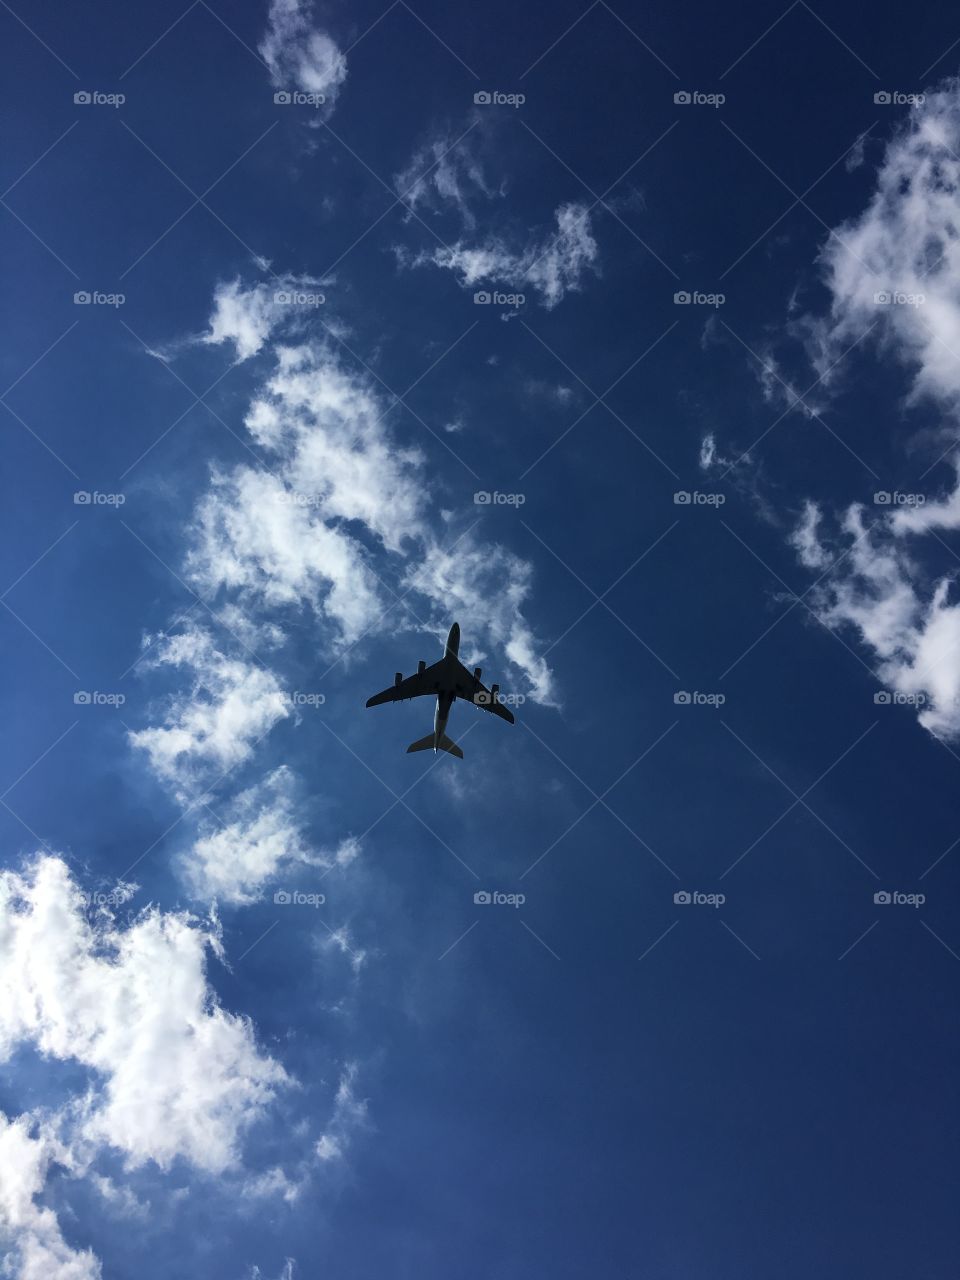 Caught a plane with an iPhone 6s